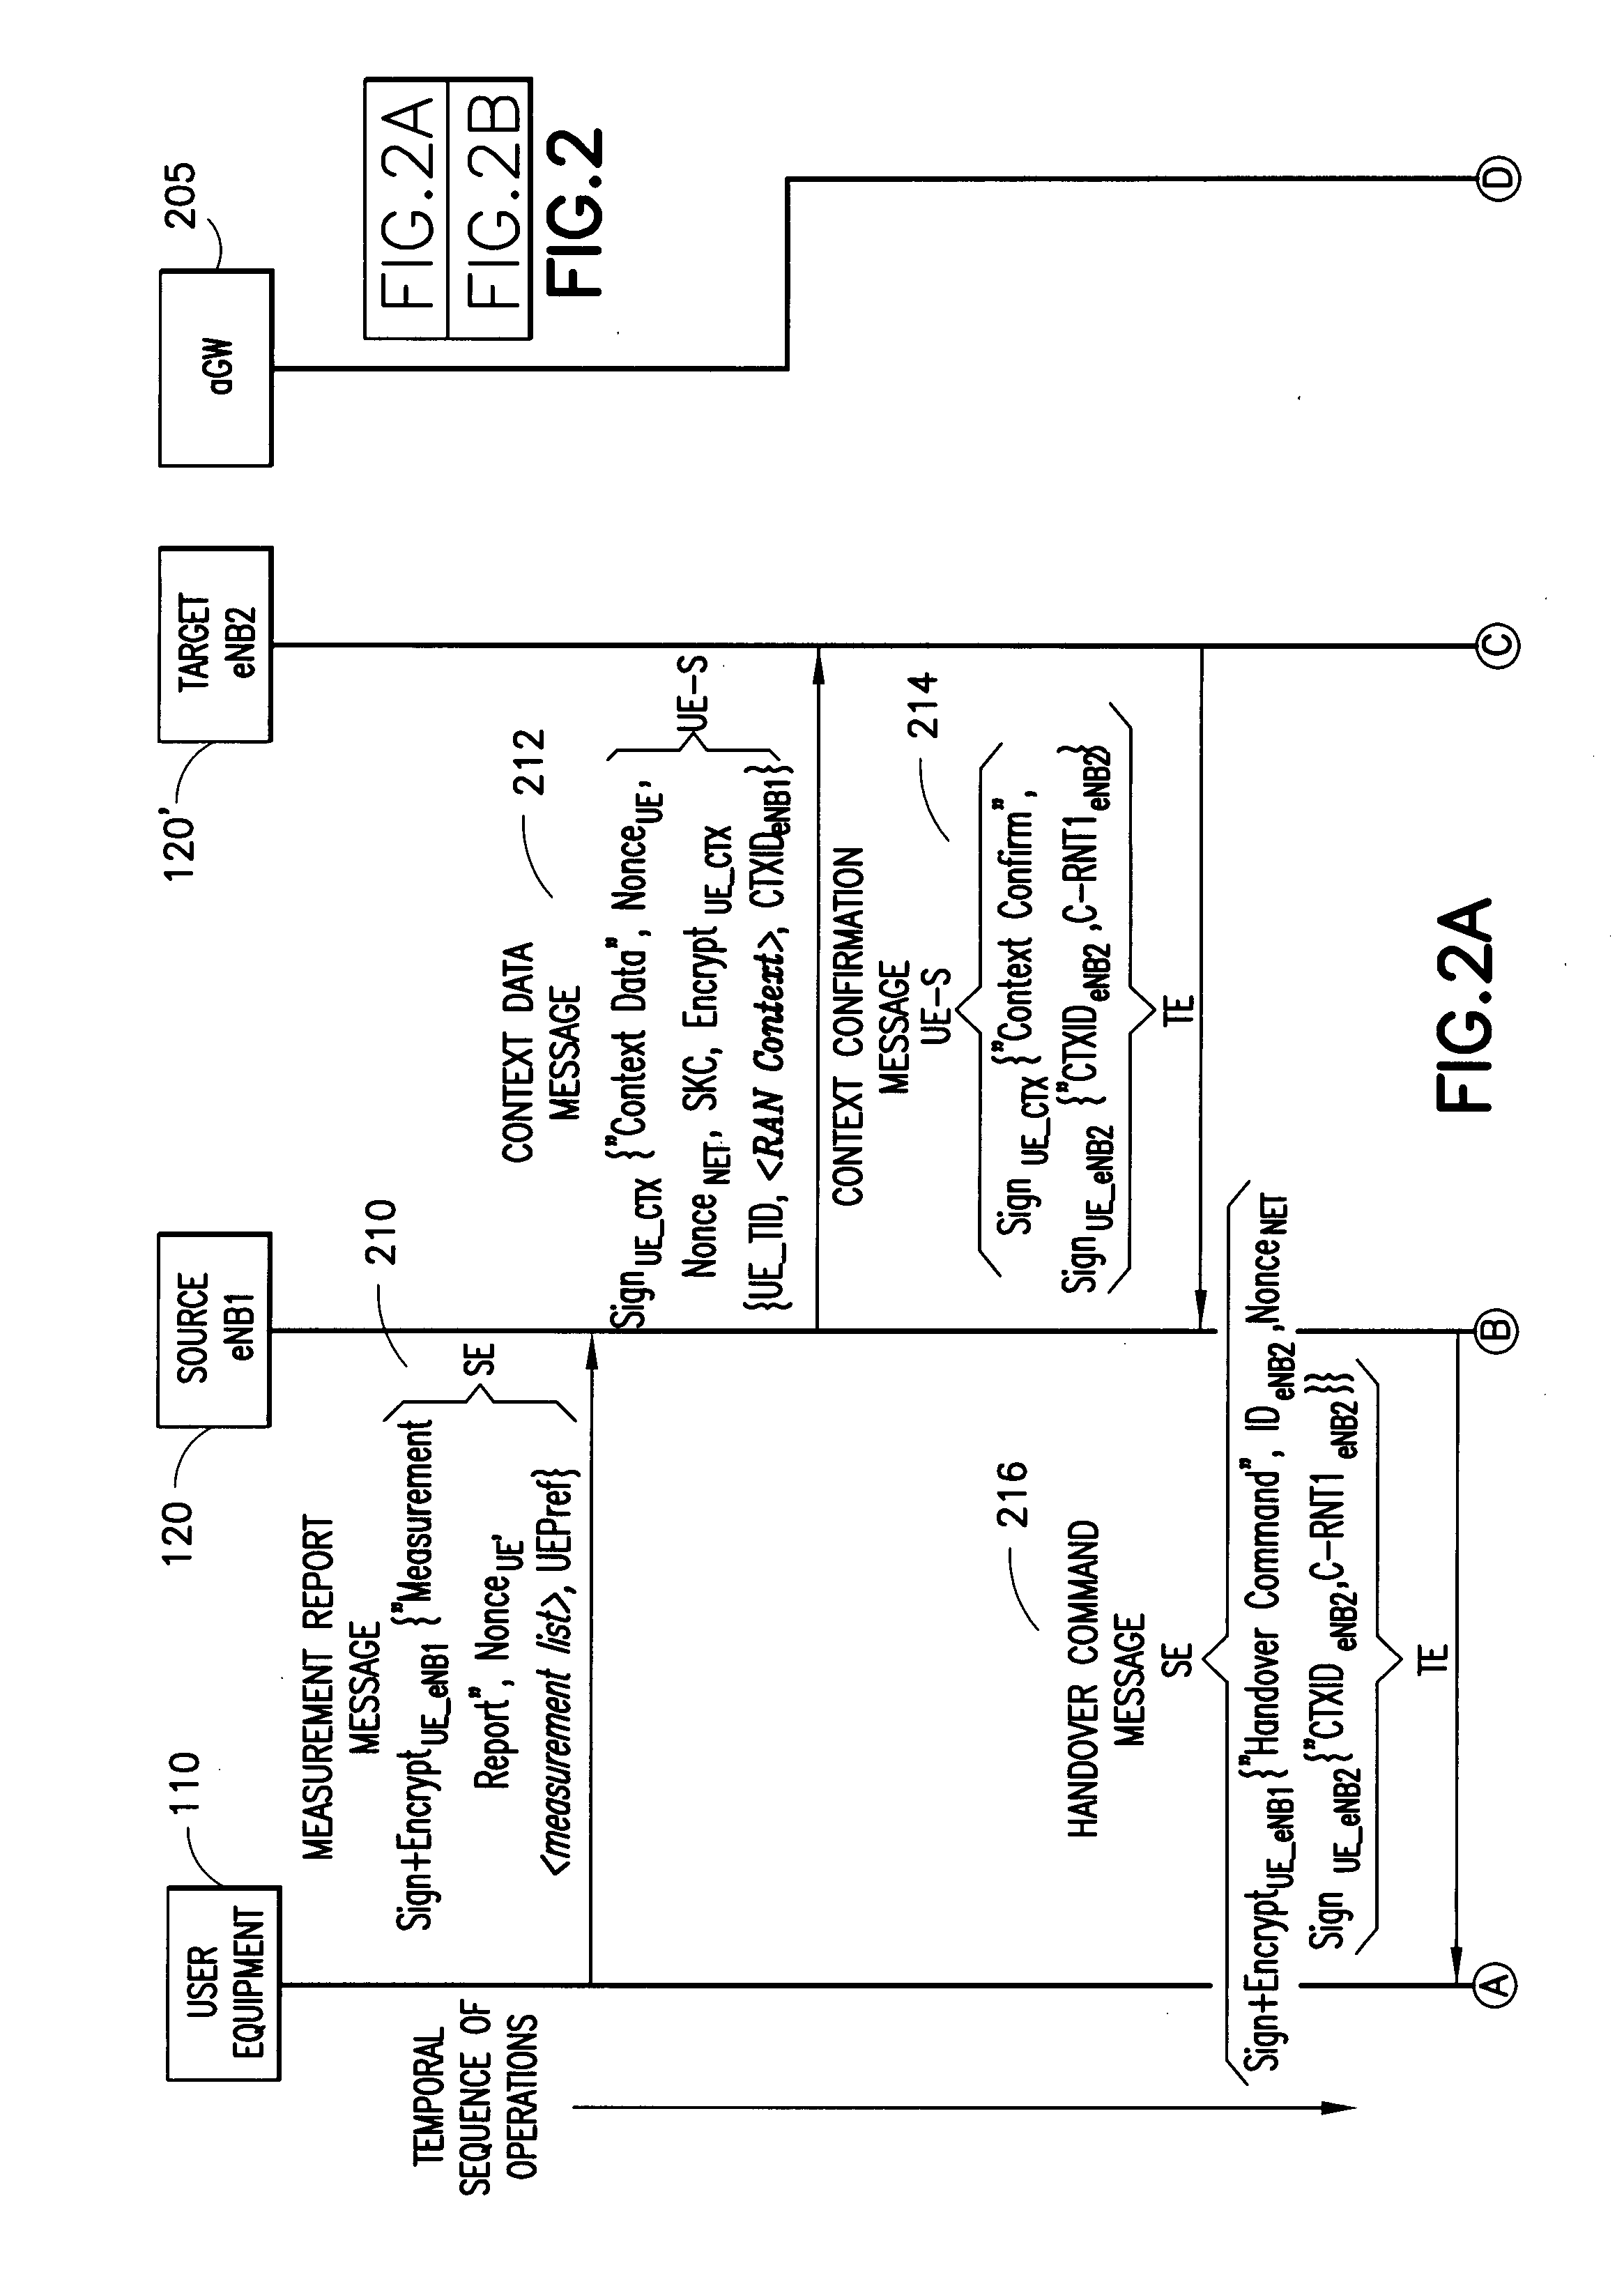 Apparatus, method and computer program product providing unified reactive and proactive handovers